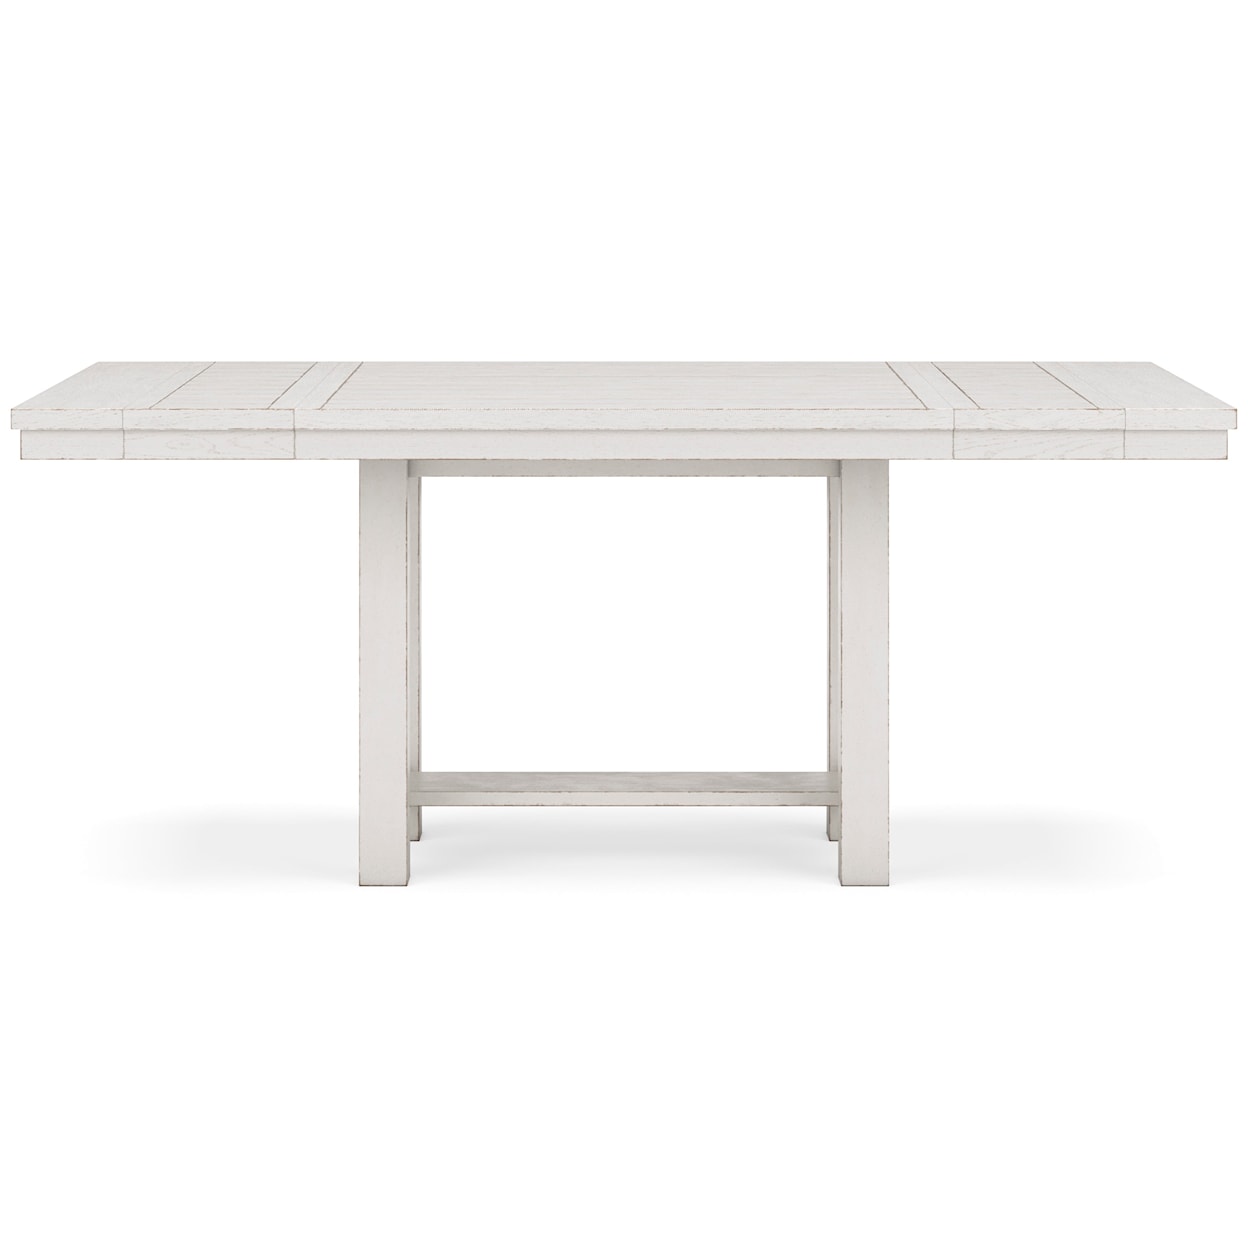 Signature Design by Ashley Robbinsdale Counter Height Dining Extension Table